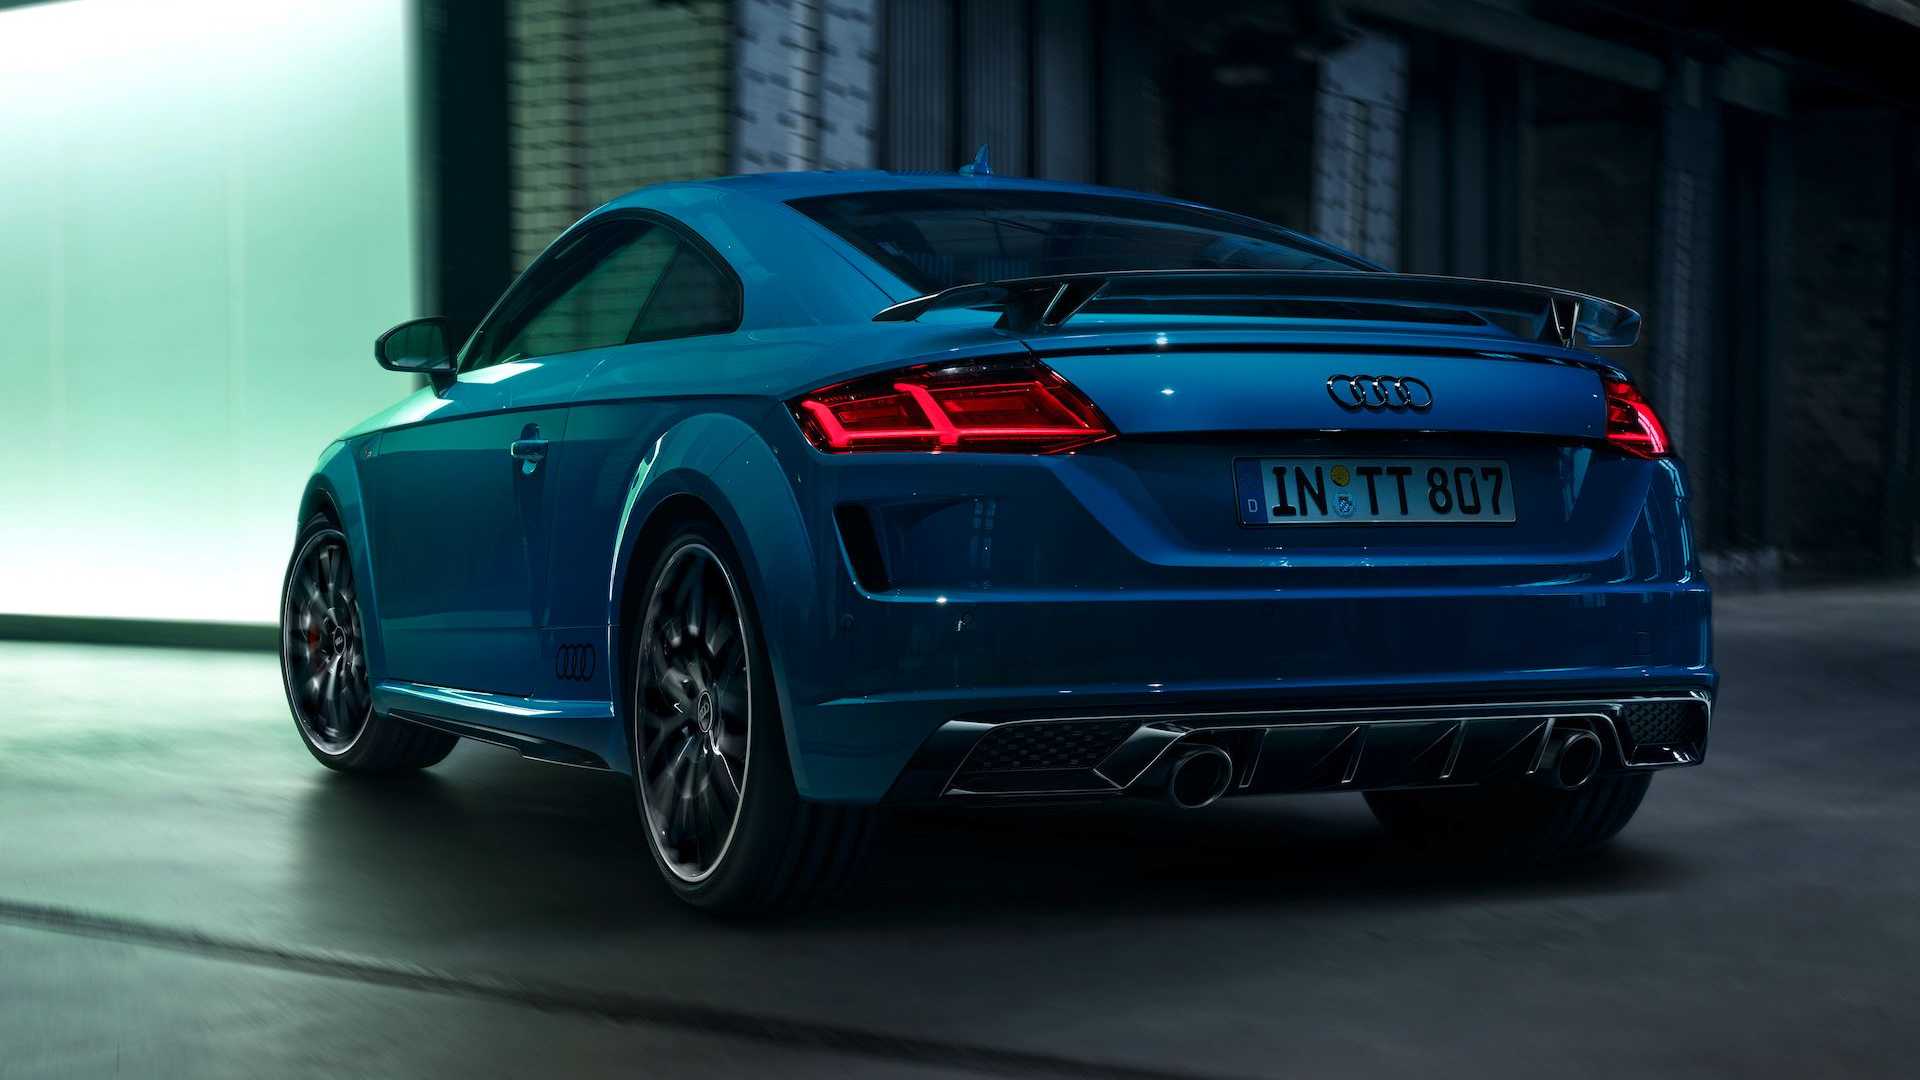 Audi TT is now available in S Line Competition Plus trim